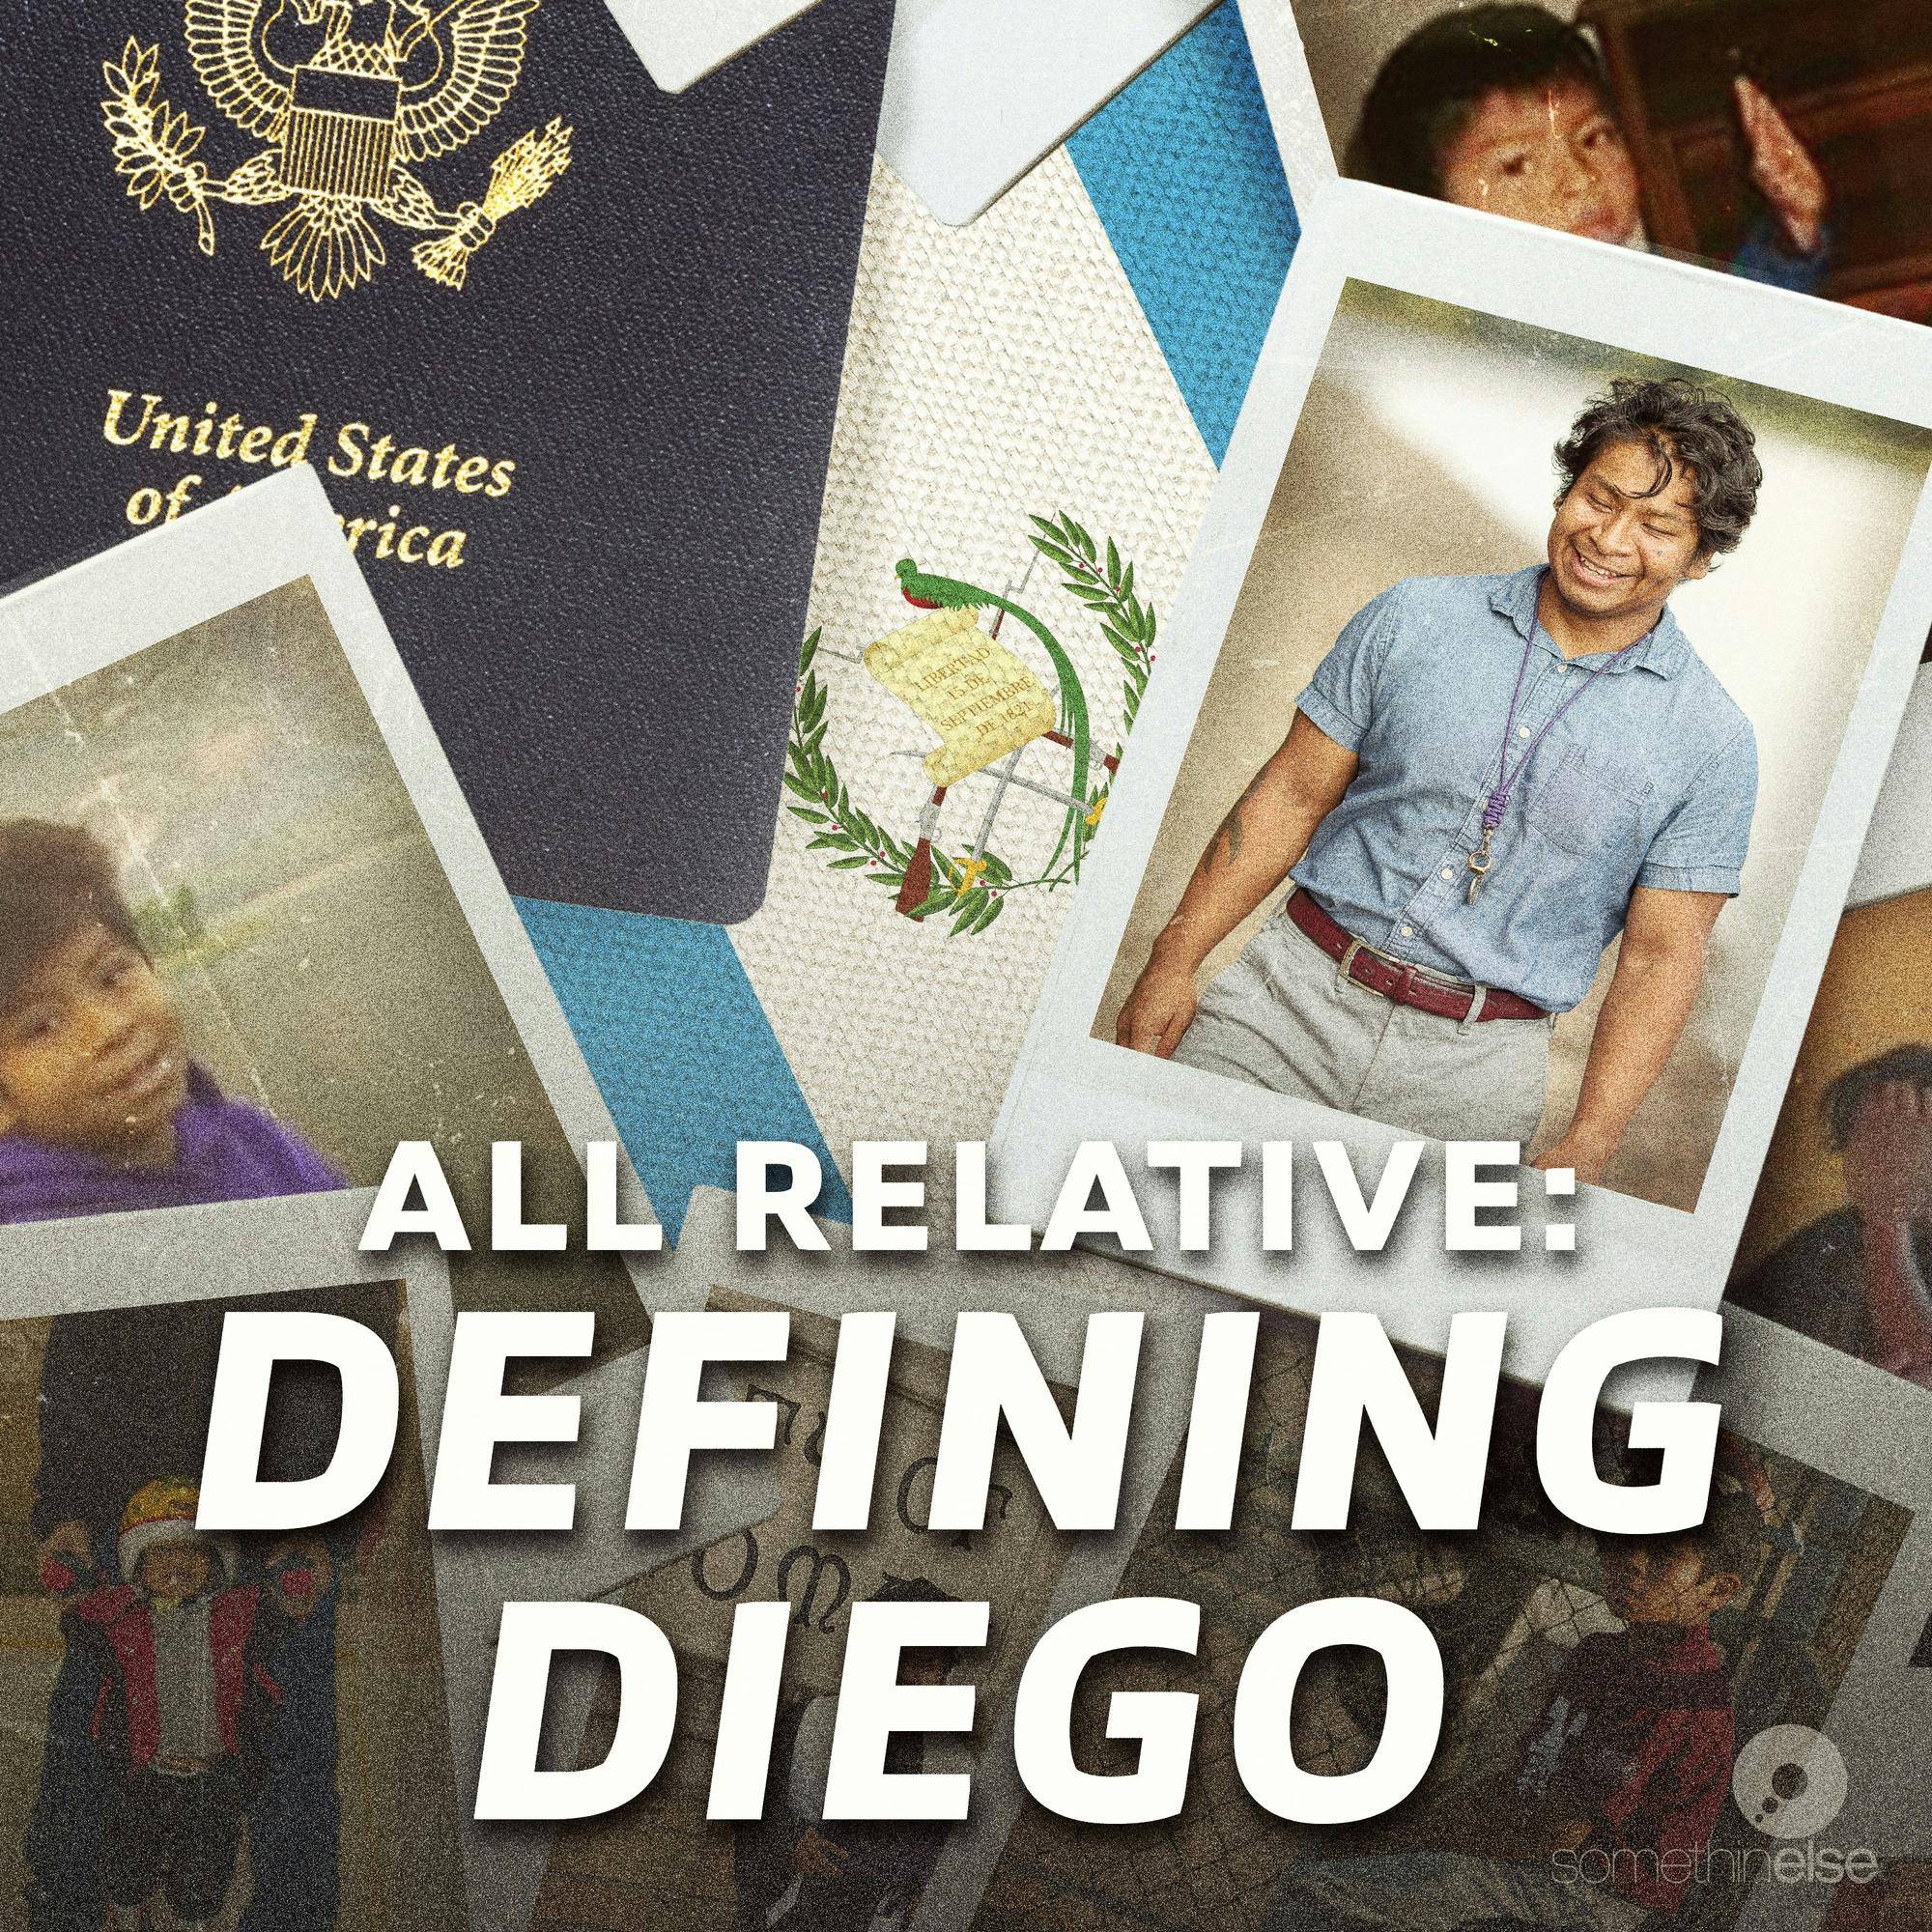 Defining Diego | 2. Where I'm From